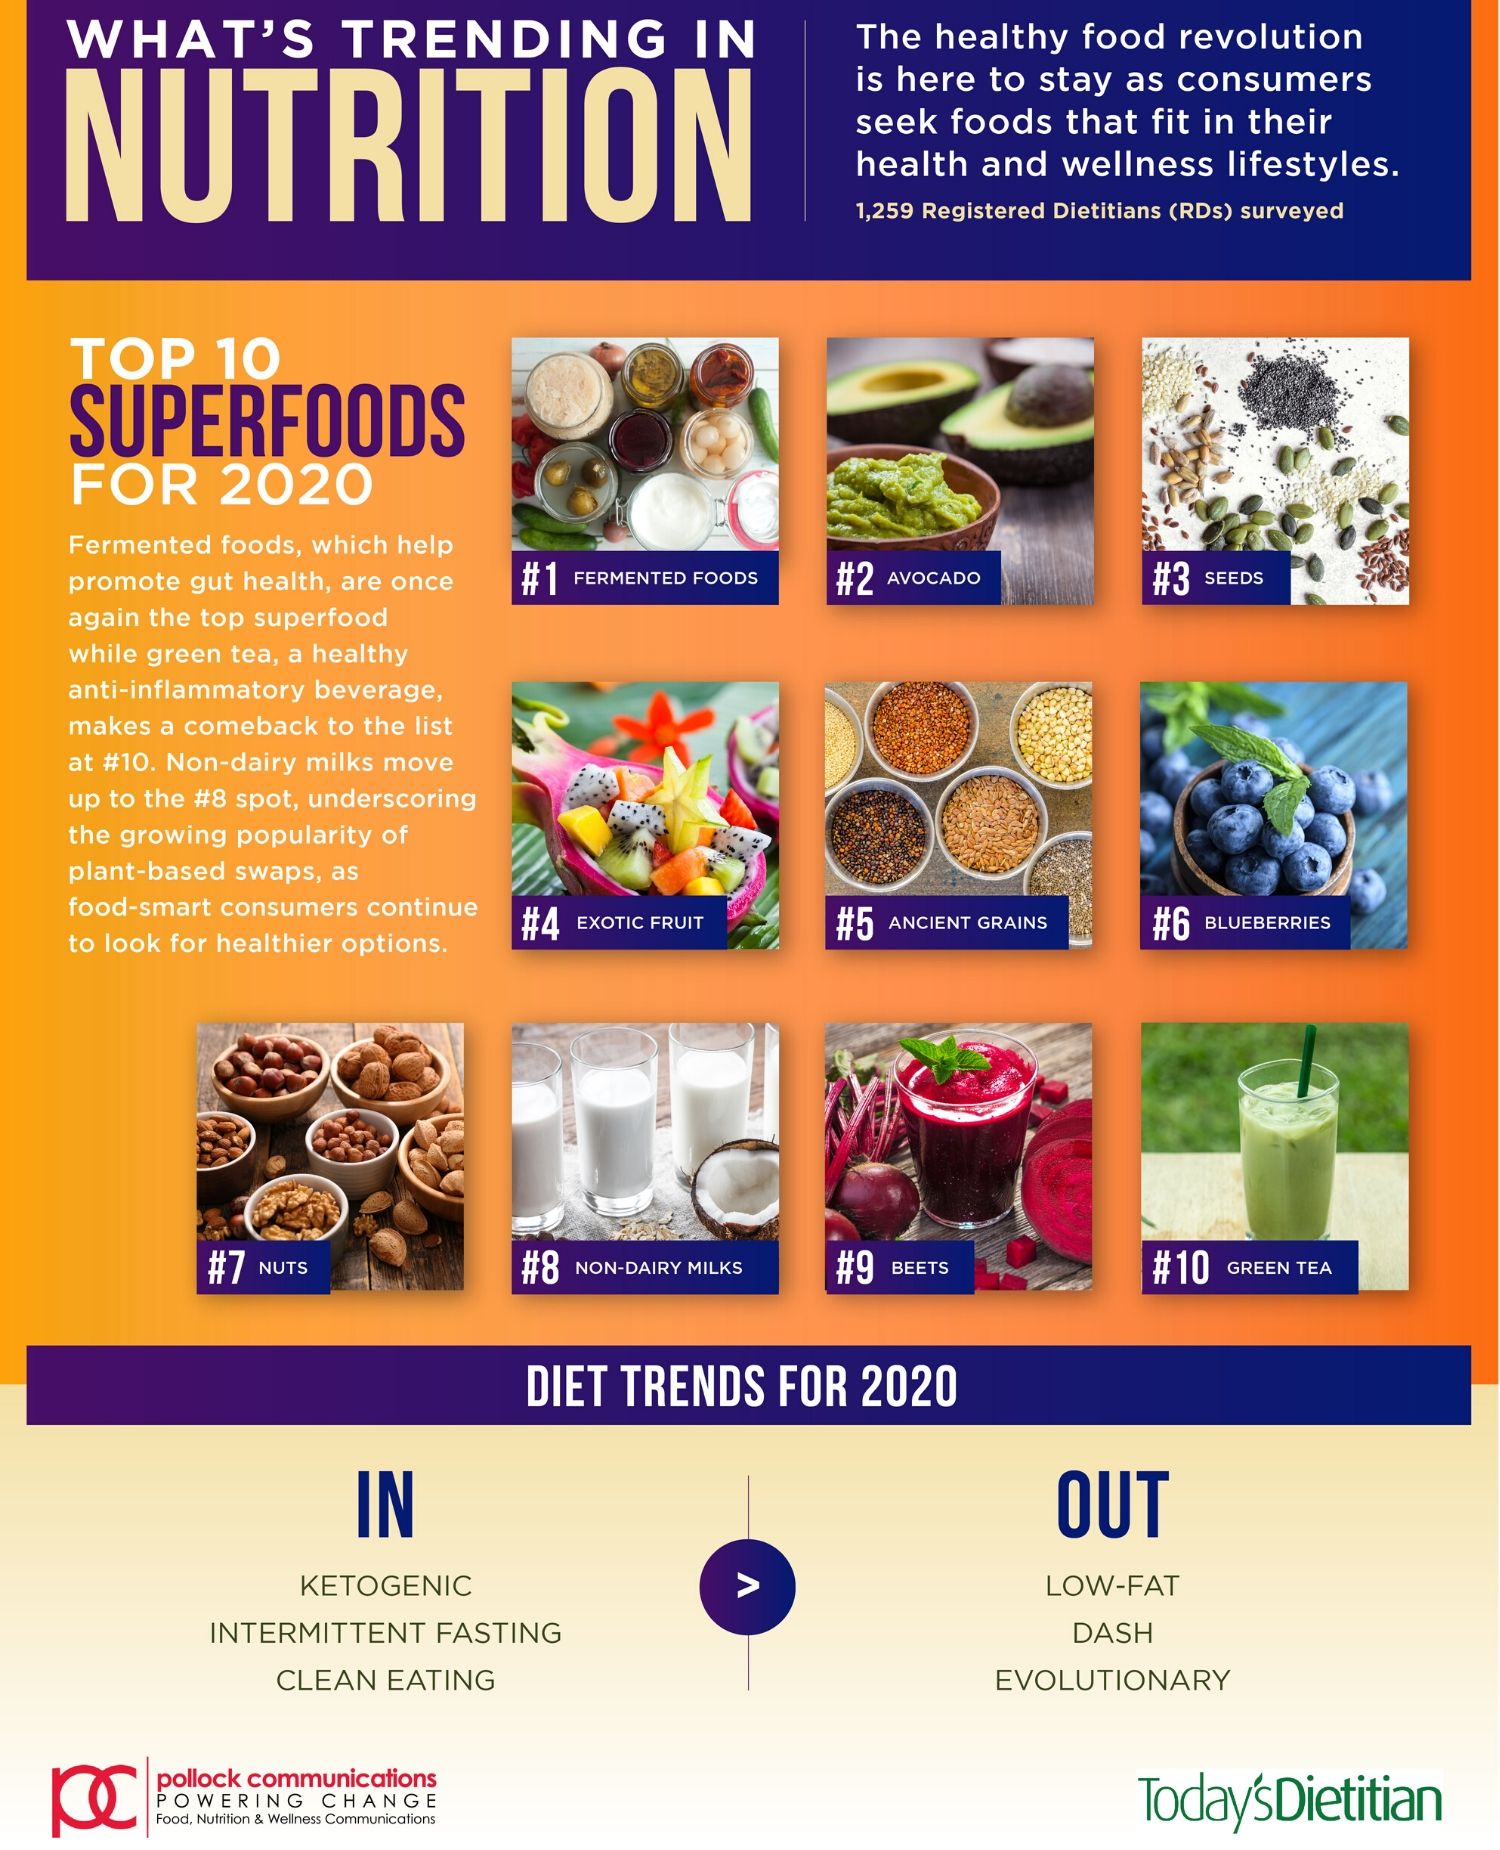 What's-Trending-In-Nutrition-Survey-by-Pollock-Communicarions-and-Today's-Dietitian